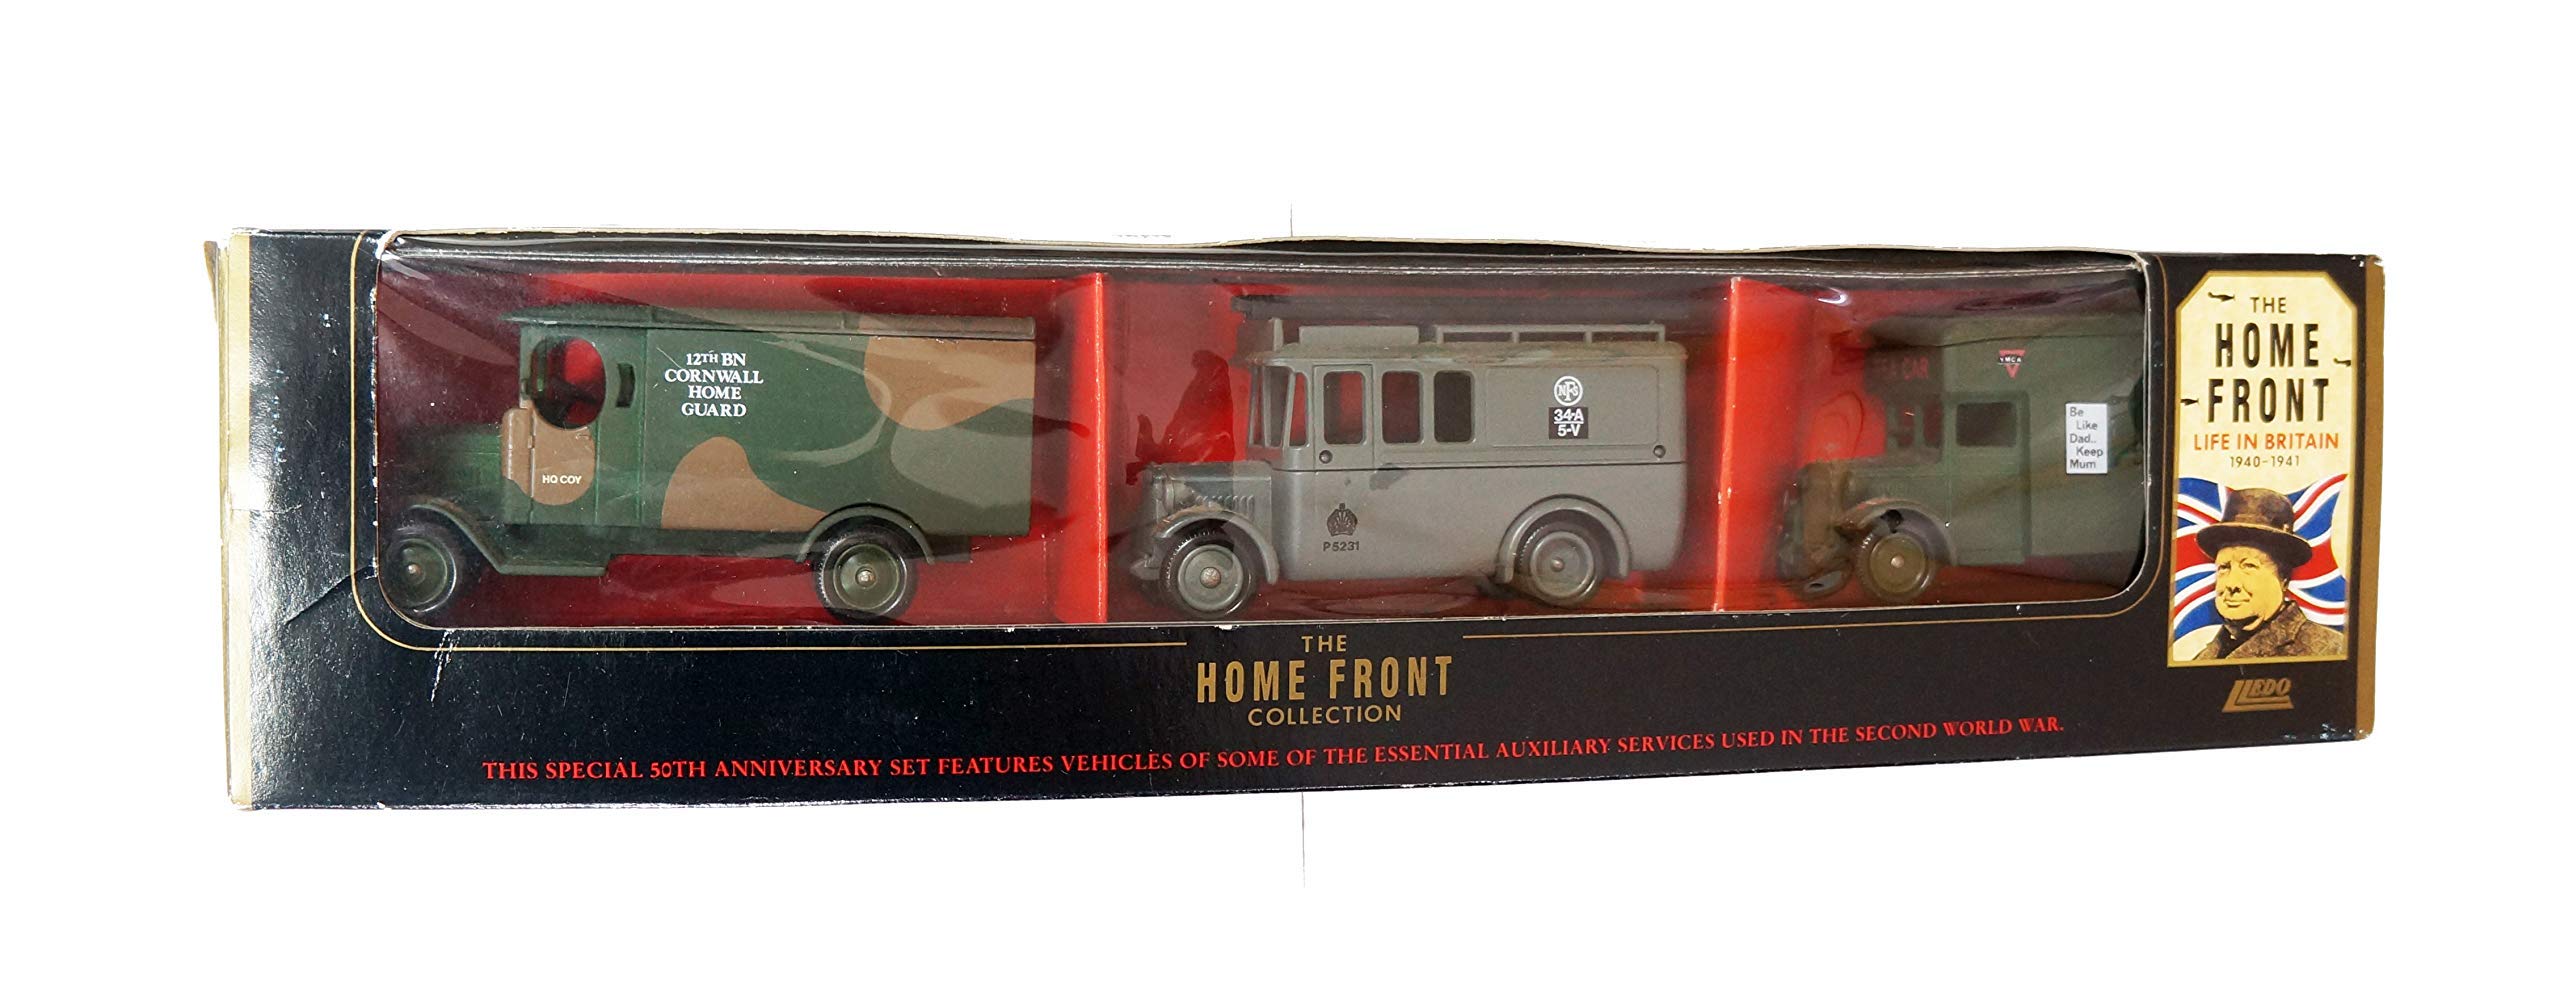 Vintage 1991 Lledo Promotional Models Of Days Gone Limited Edition The Home  Front - Life In Britain 1940-1941 Three Vehicle Set New In Box - Shop 